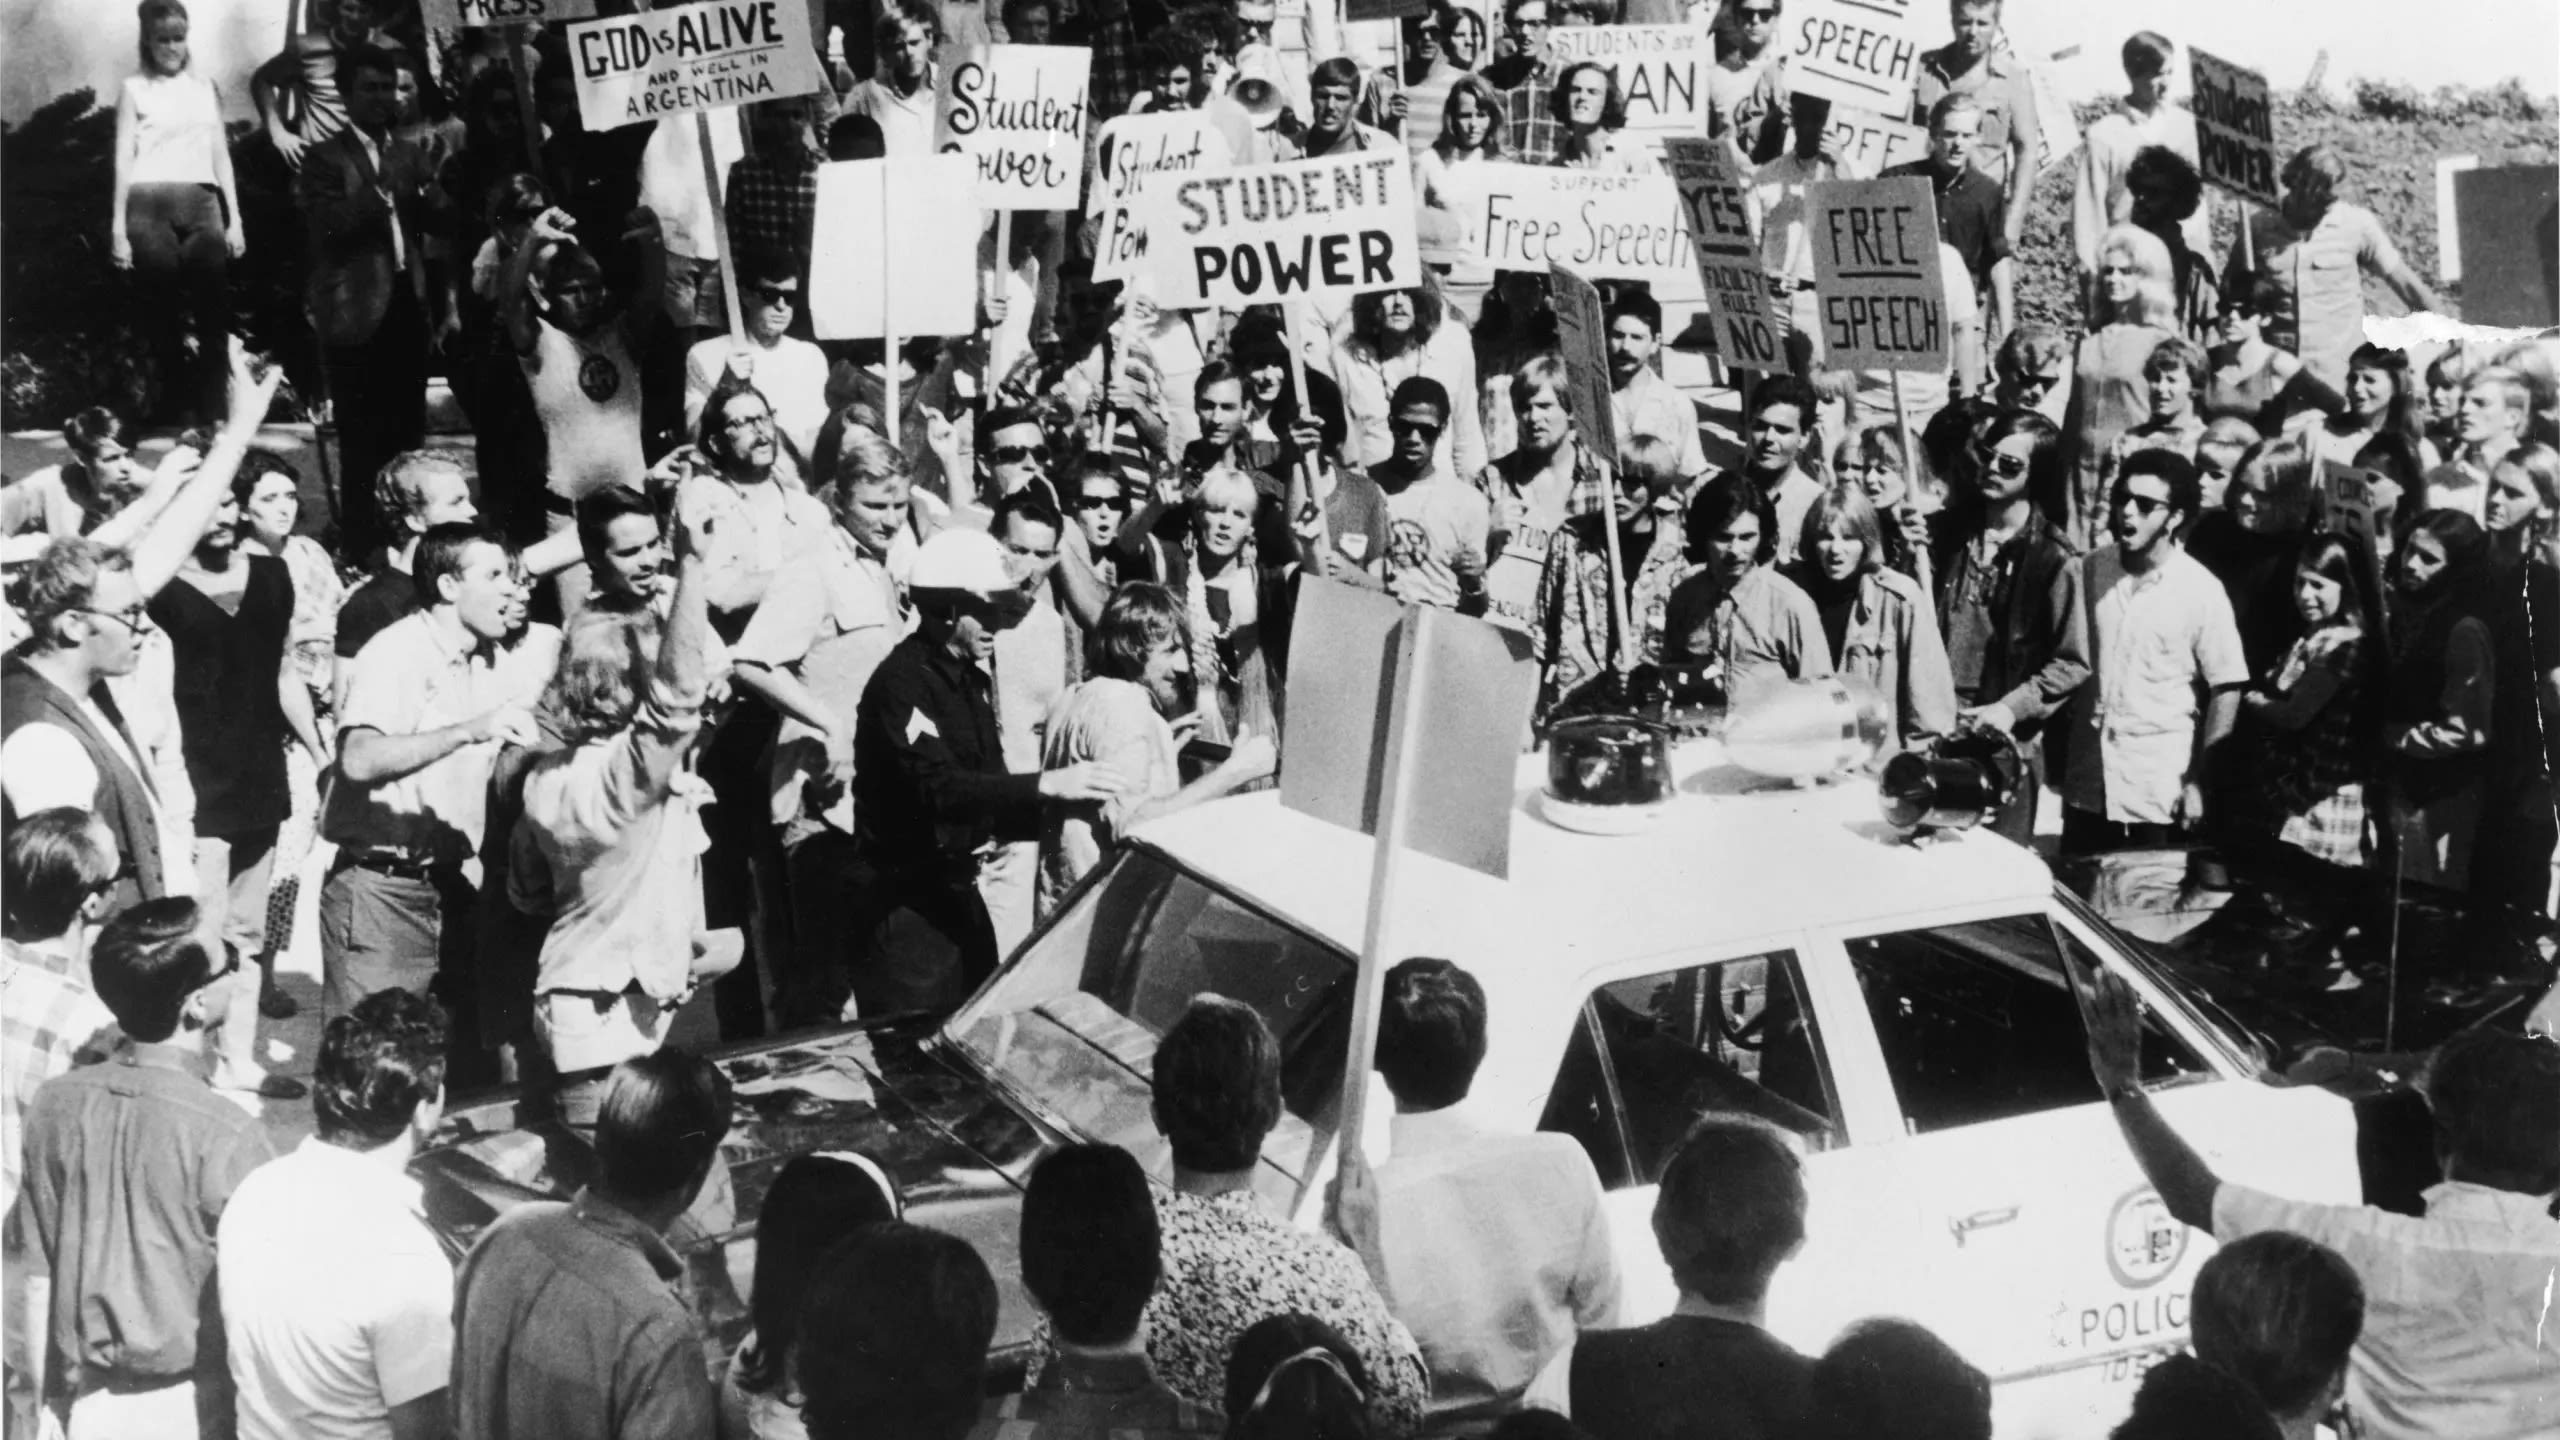 Several groups seek protest permits at Dem Convention, as parallels drawn to violent 1968 confab